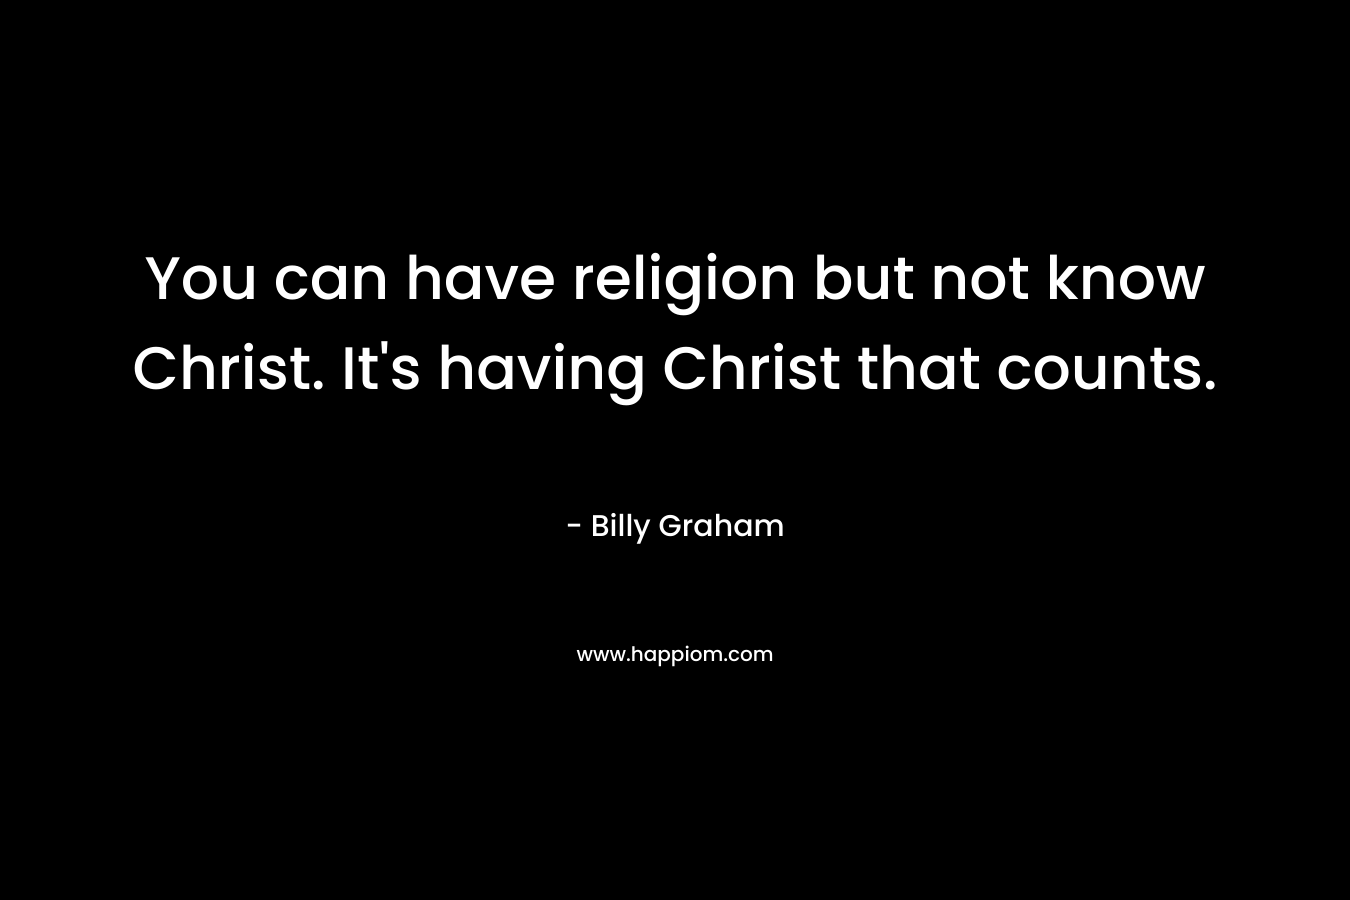 You can have religion but not know Christ. It's having Christ that counts.